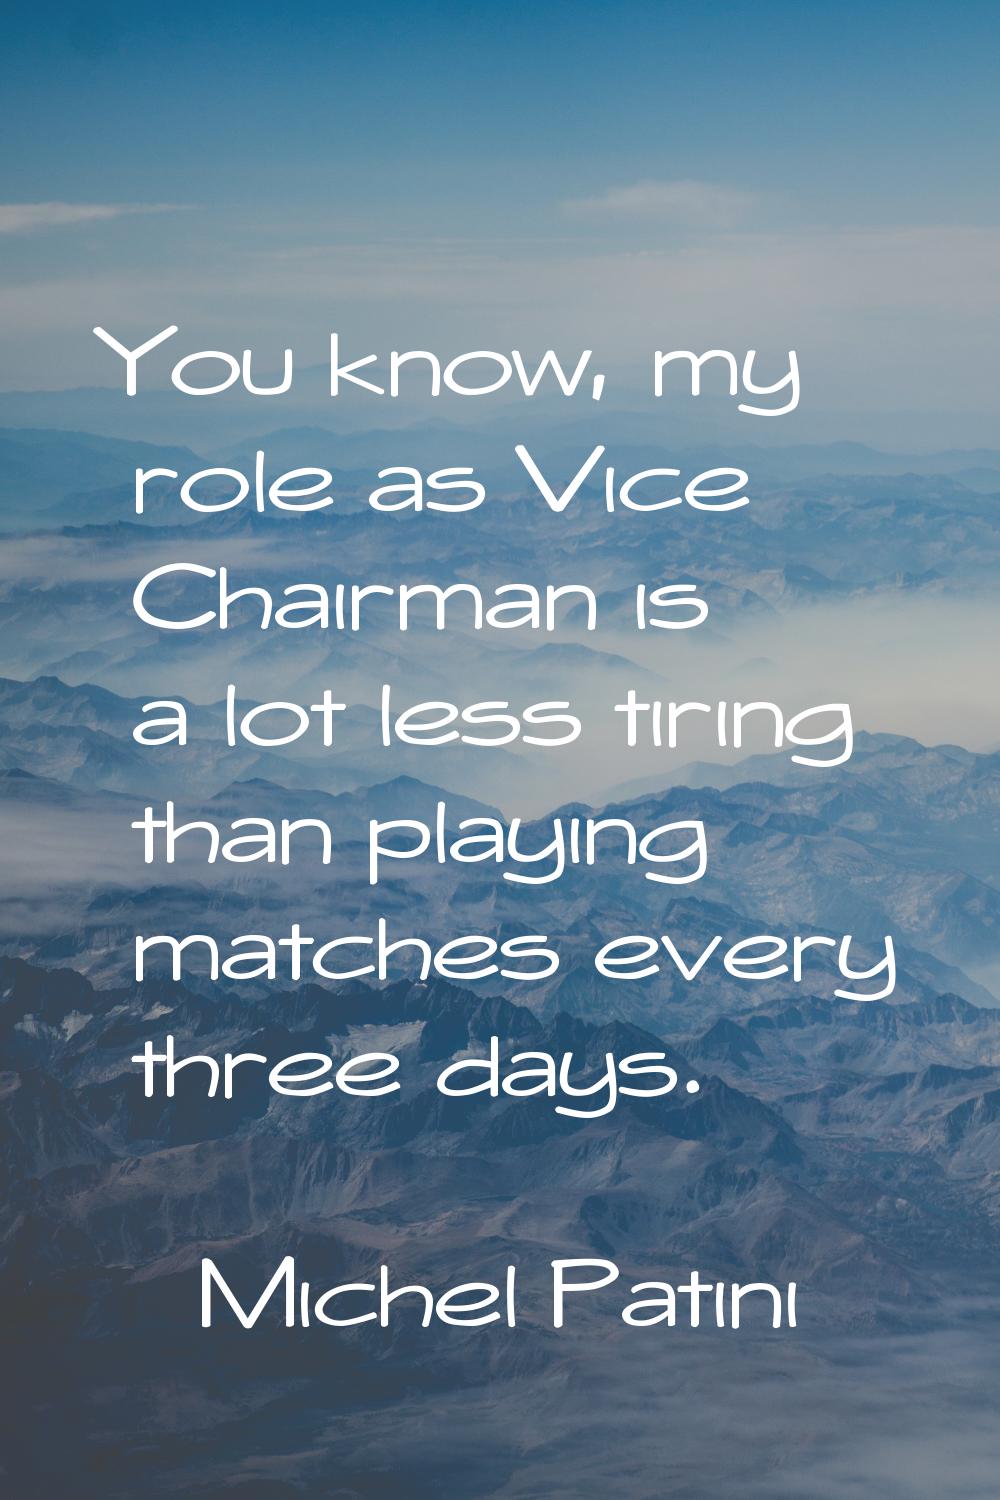 You know, my role as Vice Chairman is a lot less tiring than playing matches every three days.